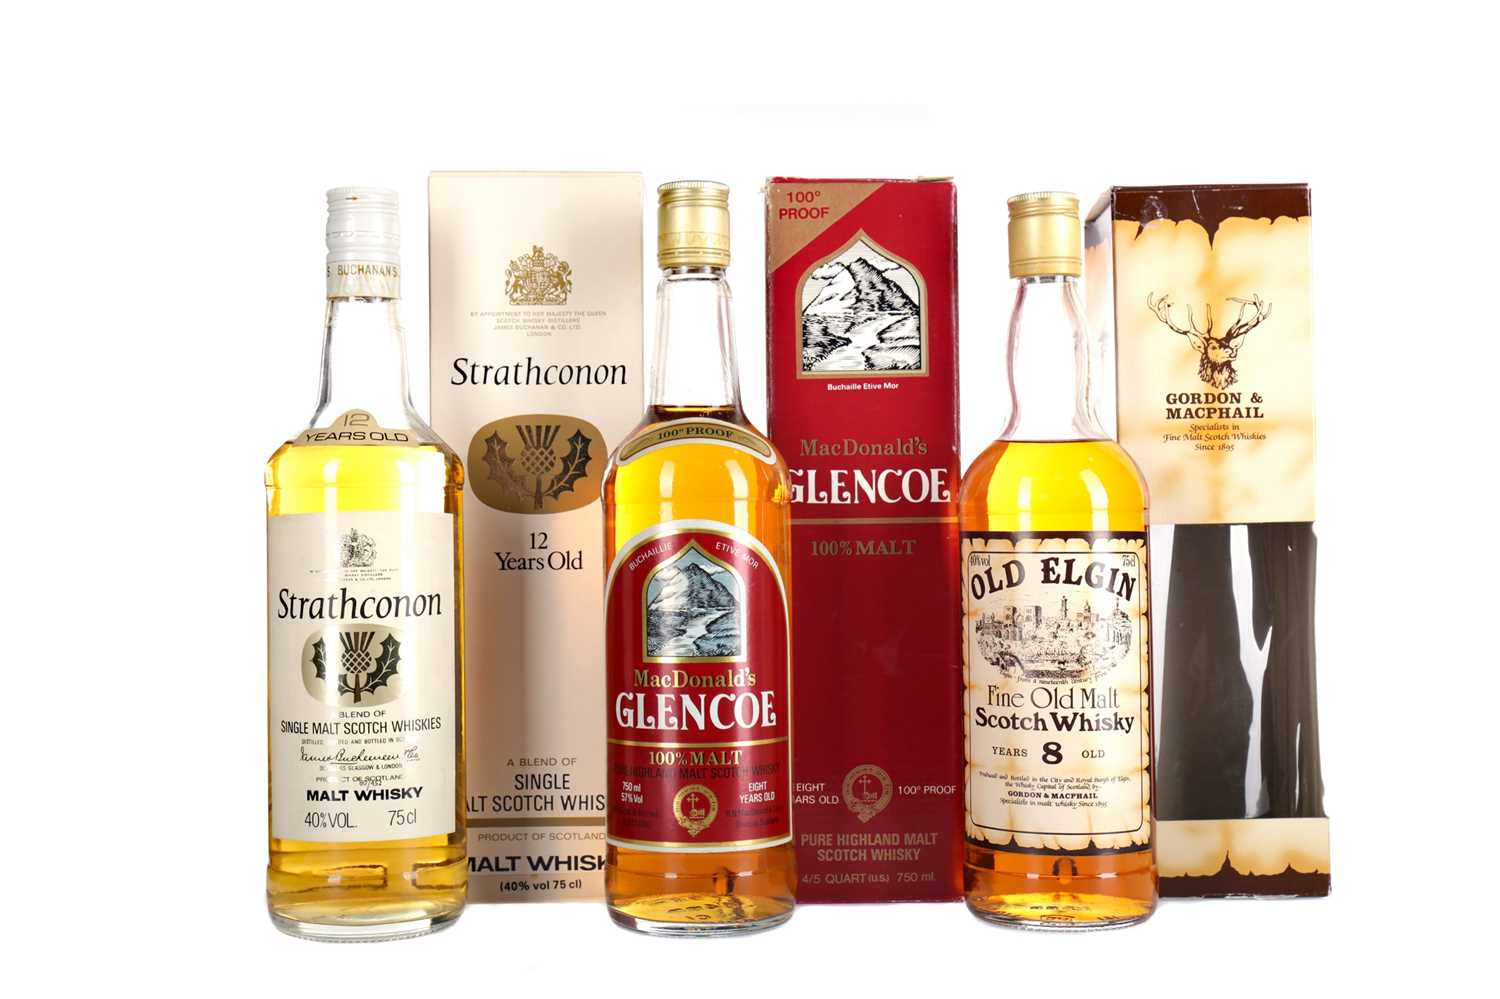 Lot 257 - STRATHCONON 12 YEARS OLD, MACDONALD'S GLENCOE AND OLD ELGIN 8 YEARS OLD